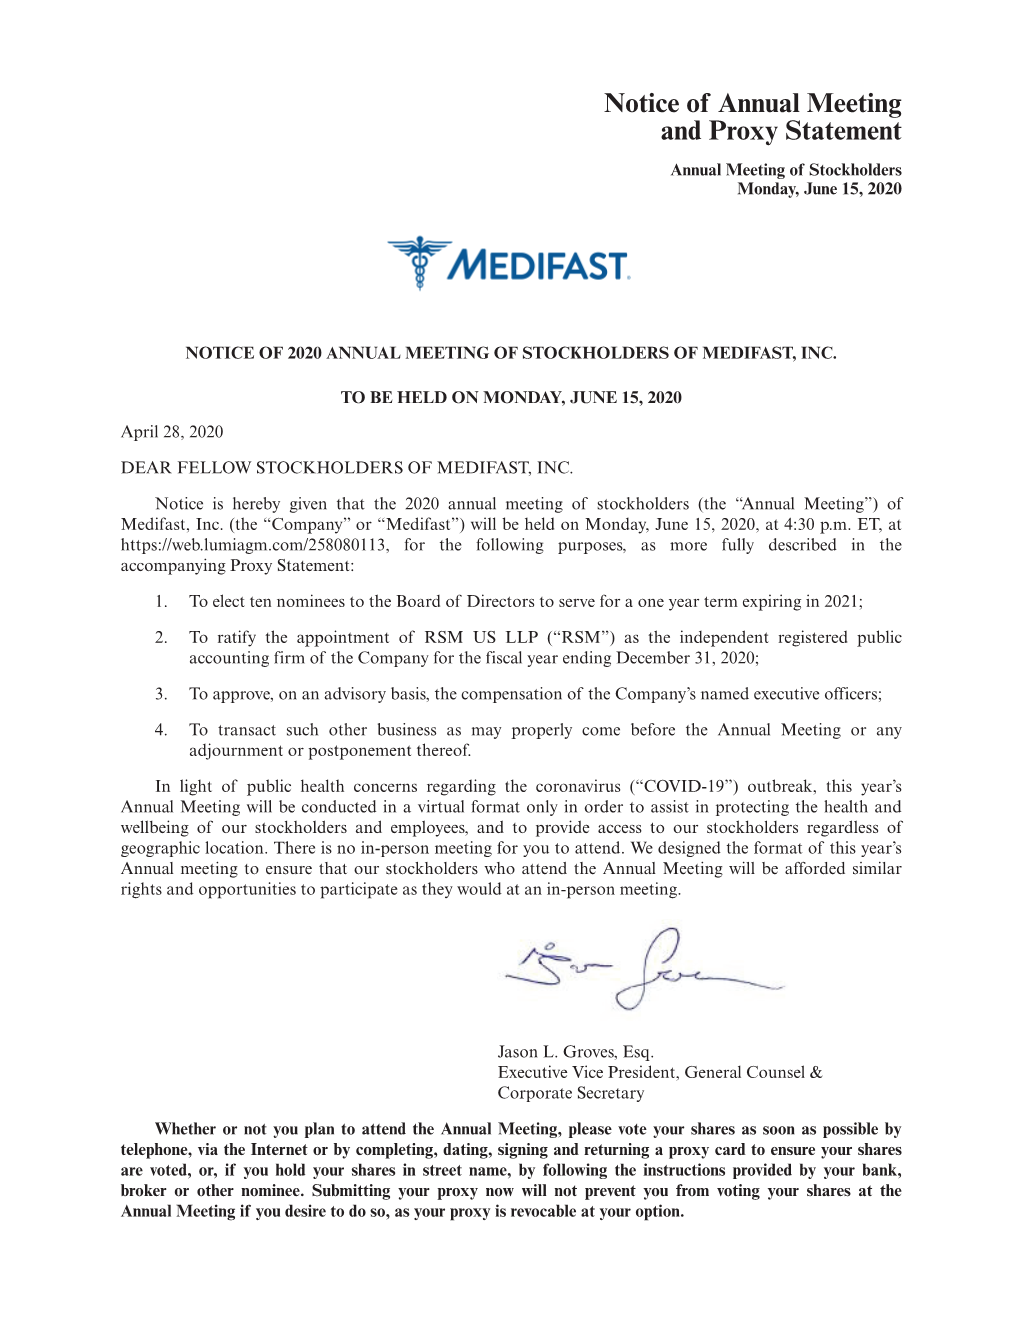 Notice of Annual Meeting and Proxy Statement Annual Meeting of Stockholders Monday, June 15, 2020